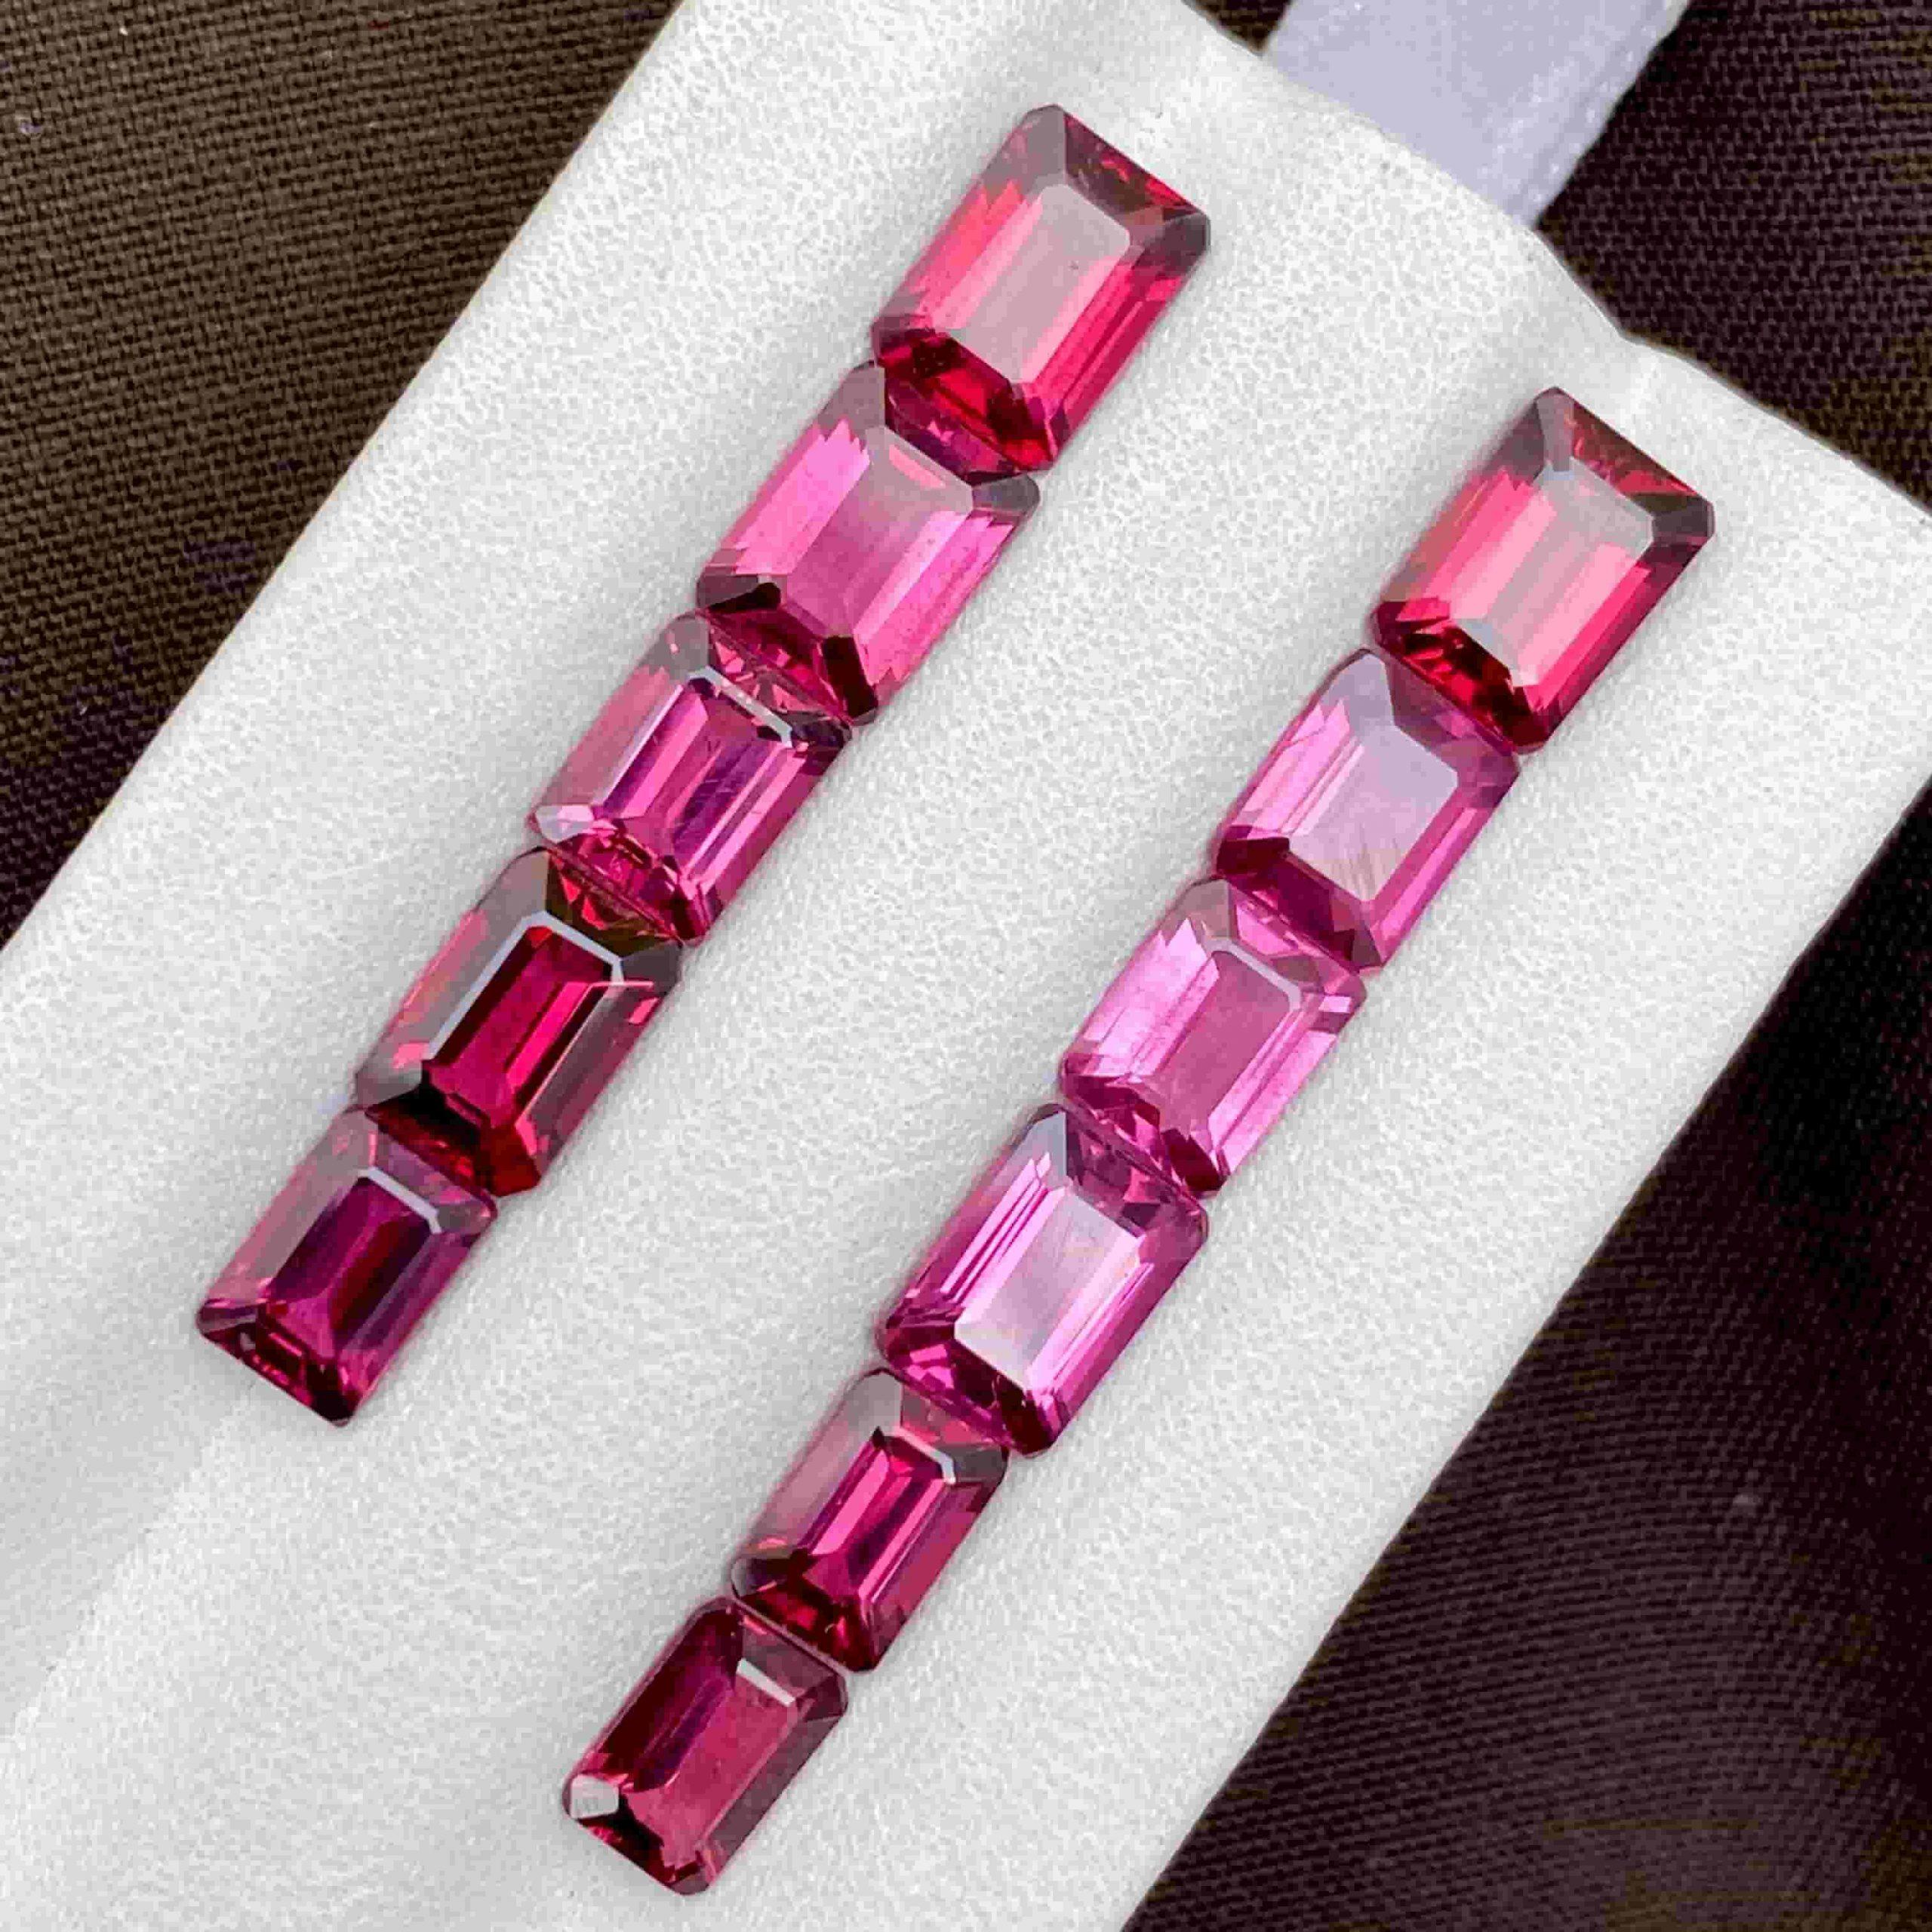 Mixed Cut 11.40 Carats Pink Rhodolite Garnet Lot Natural Gemstones From Africa For Sale